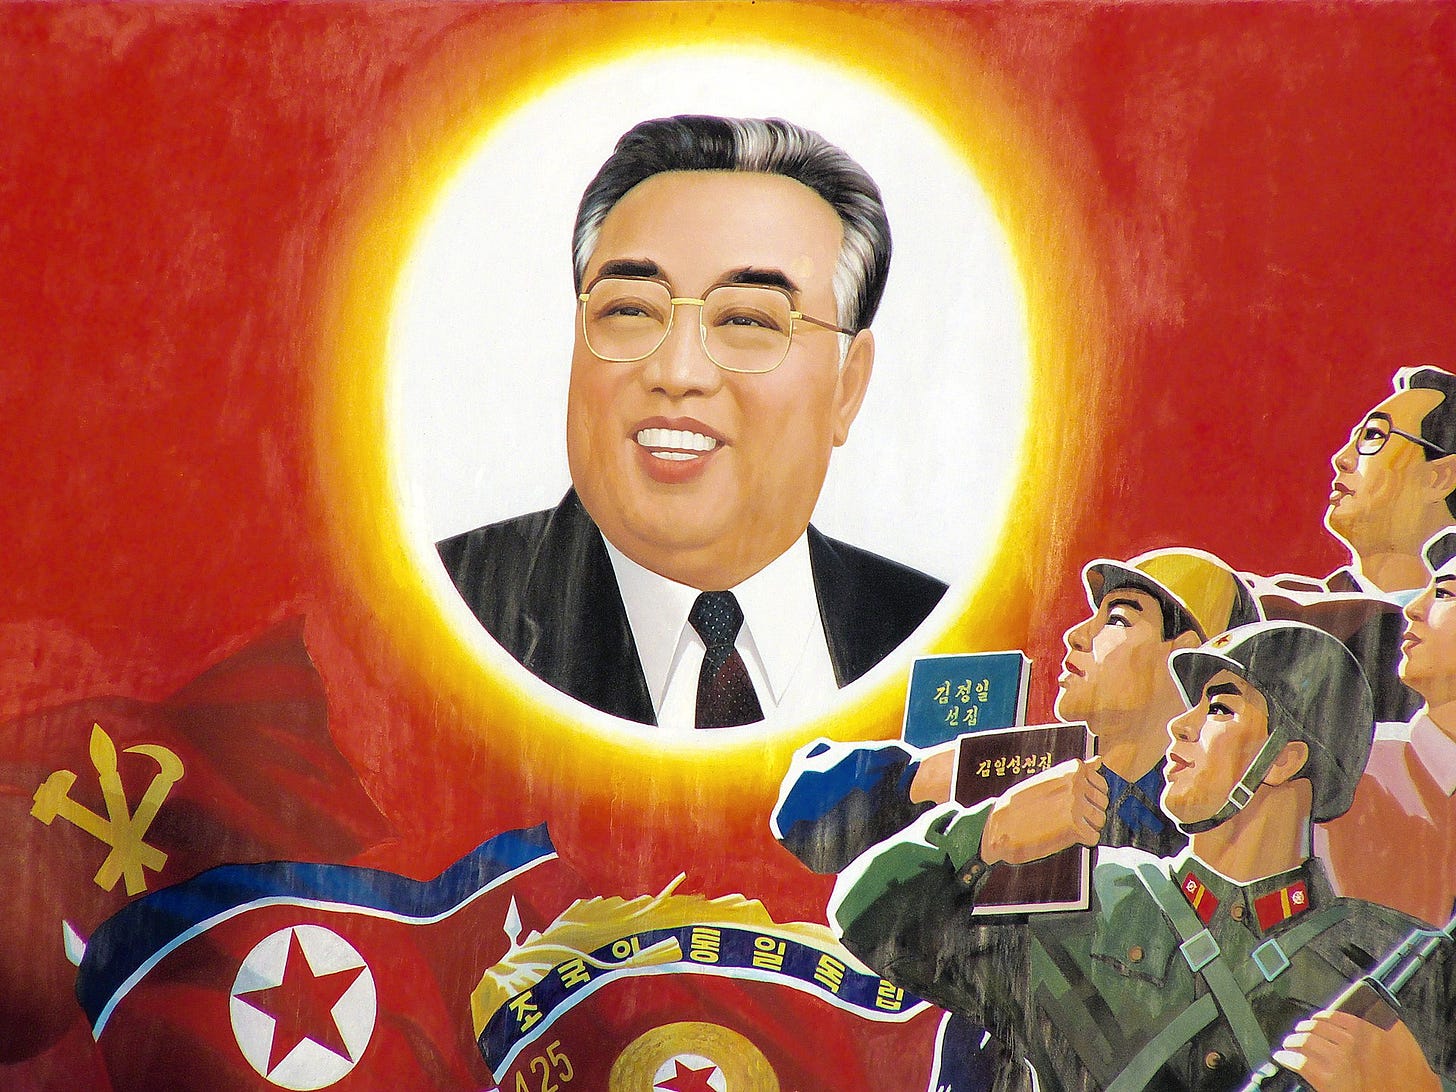 Kim depicted as the Sun on a propaganda mural. The given name Il-sung means 'become the Sun'. Likewise, his birthday is called "Day of the Sun".